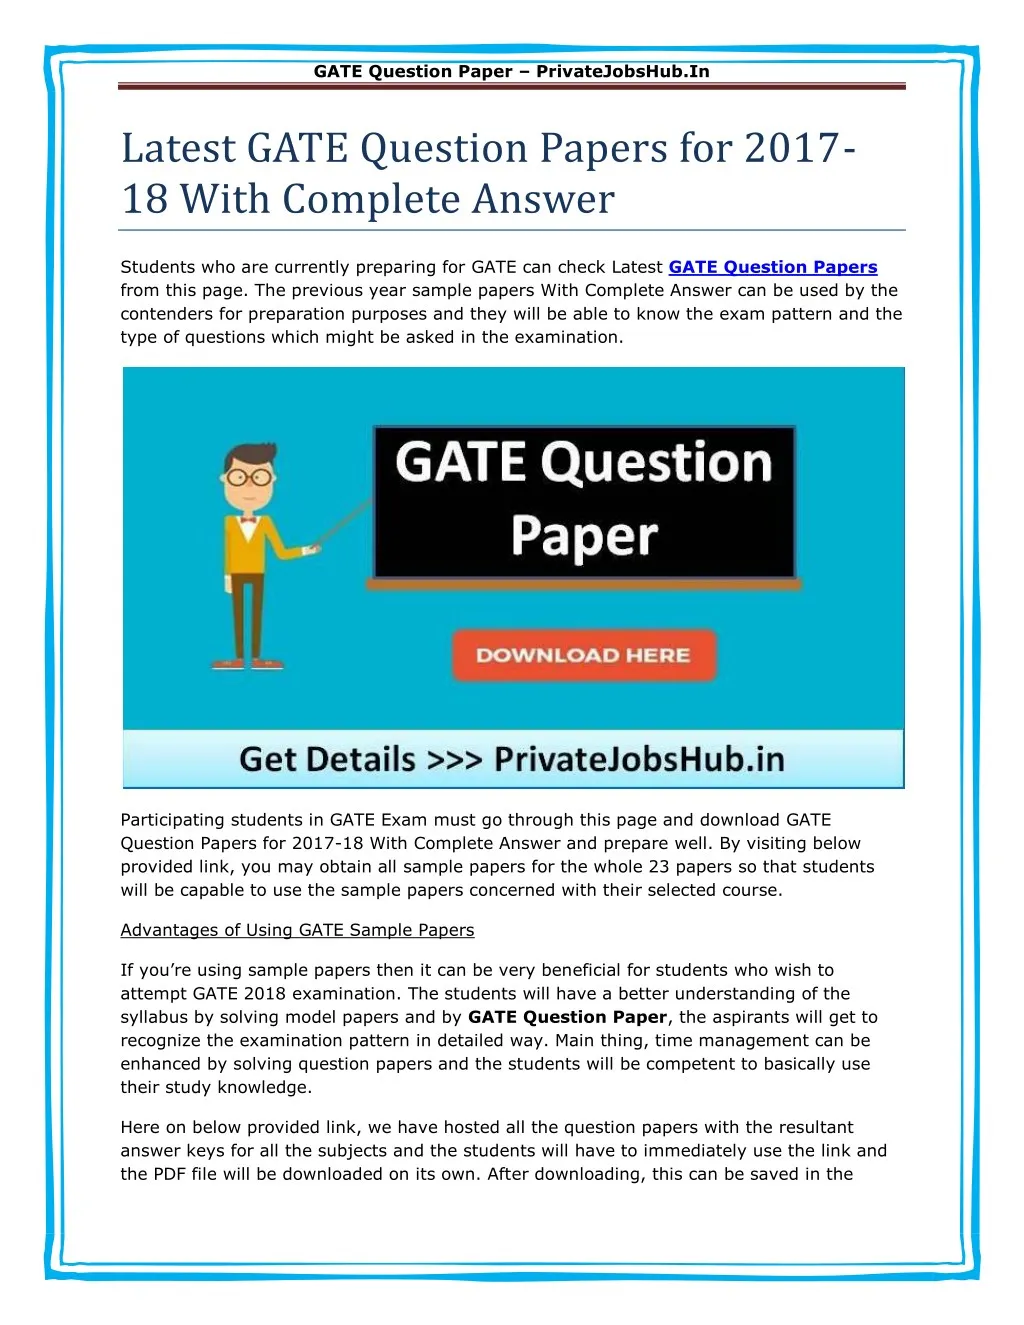 gate question paper privatejobshub in